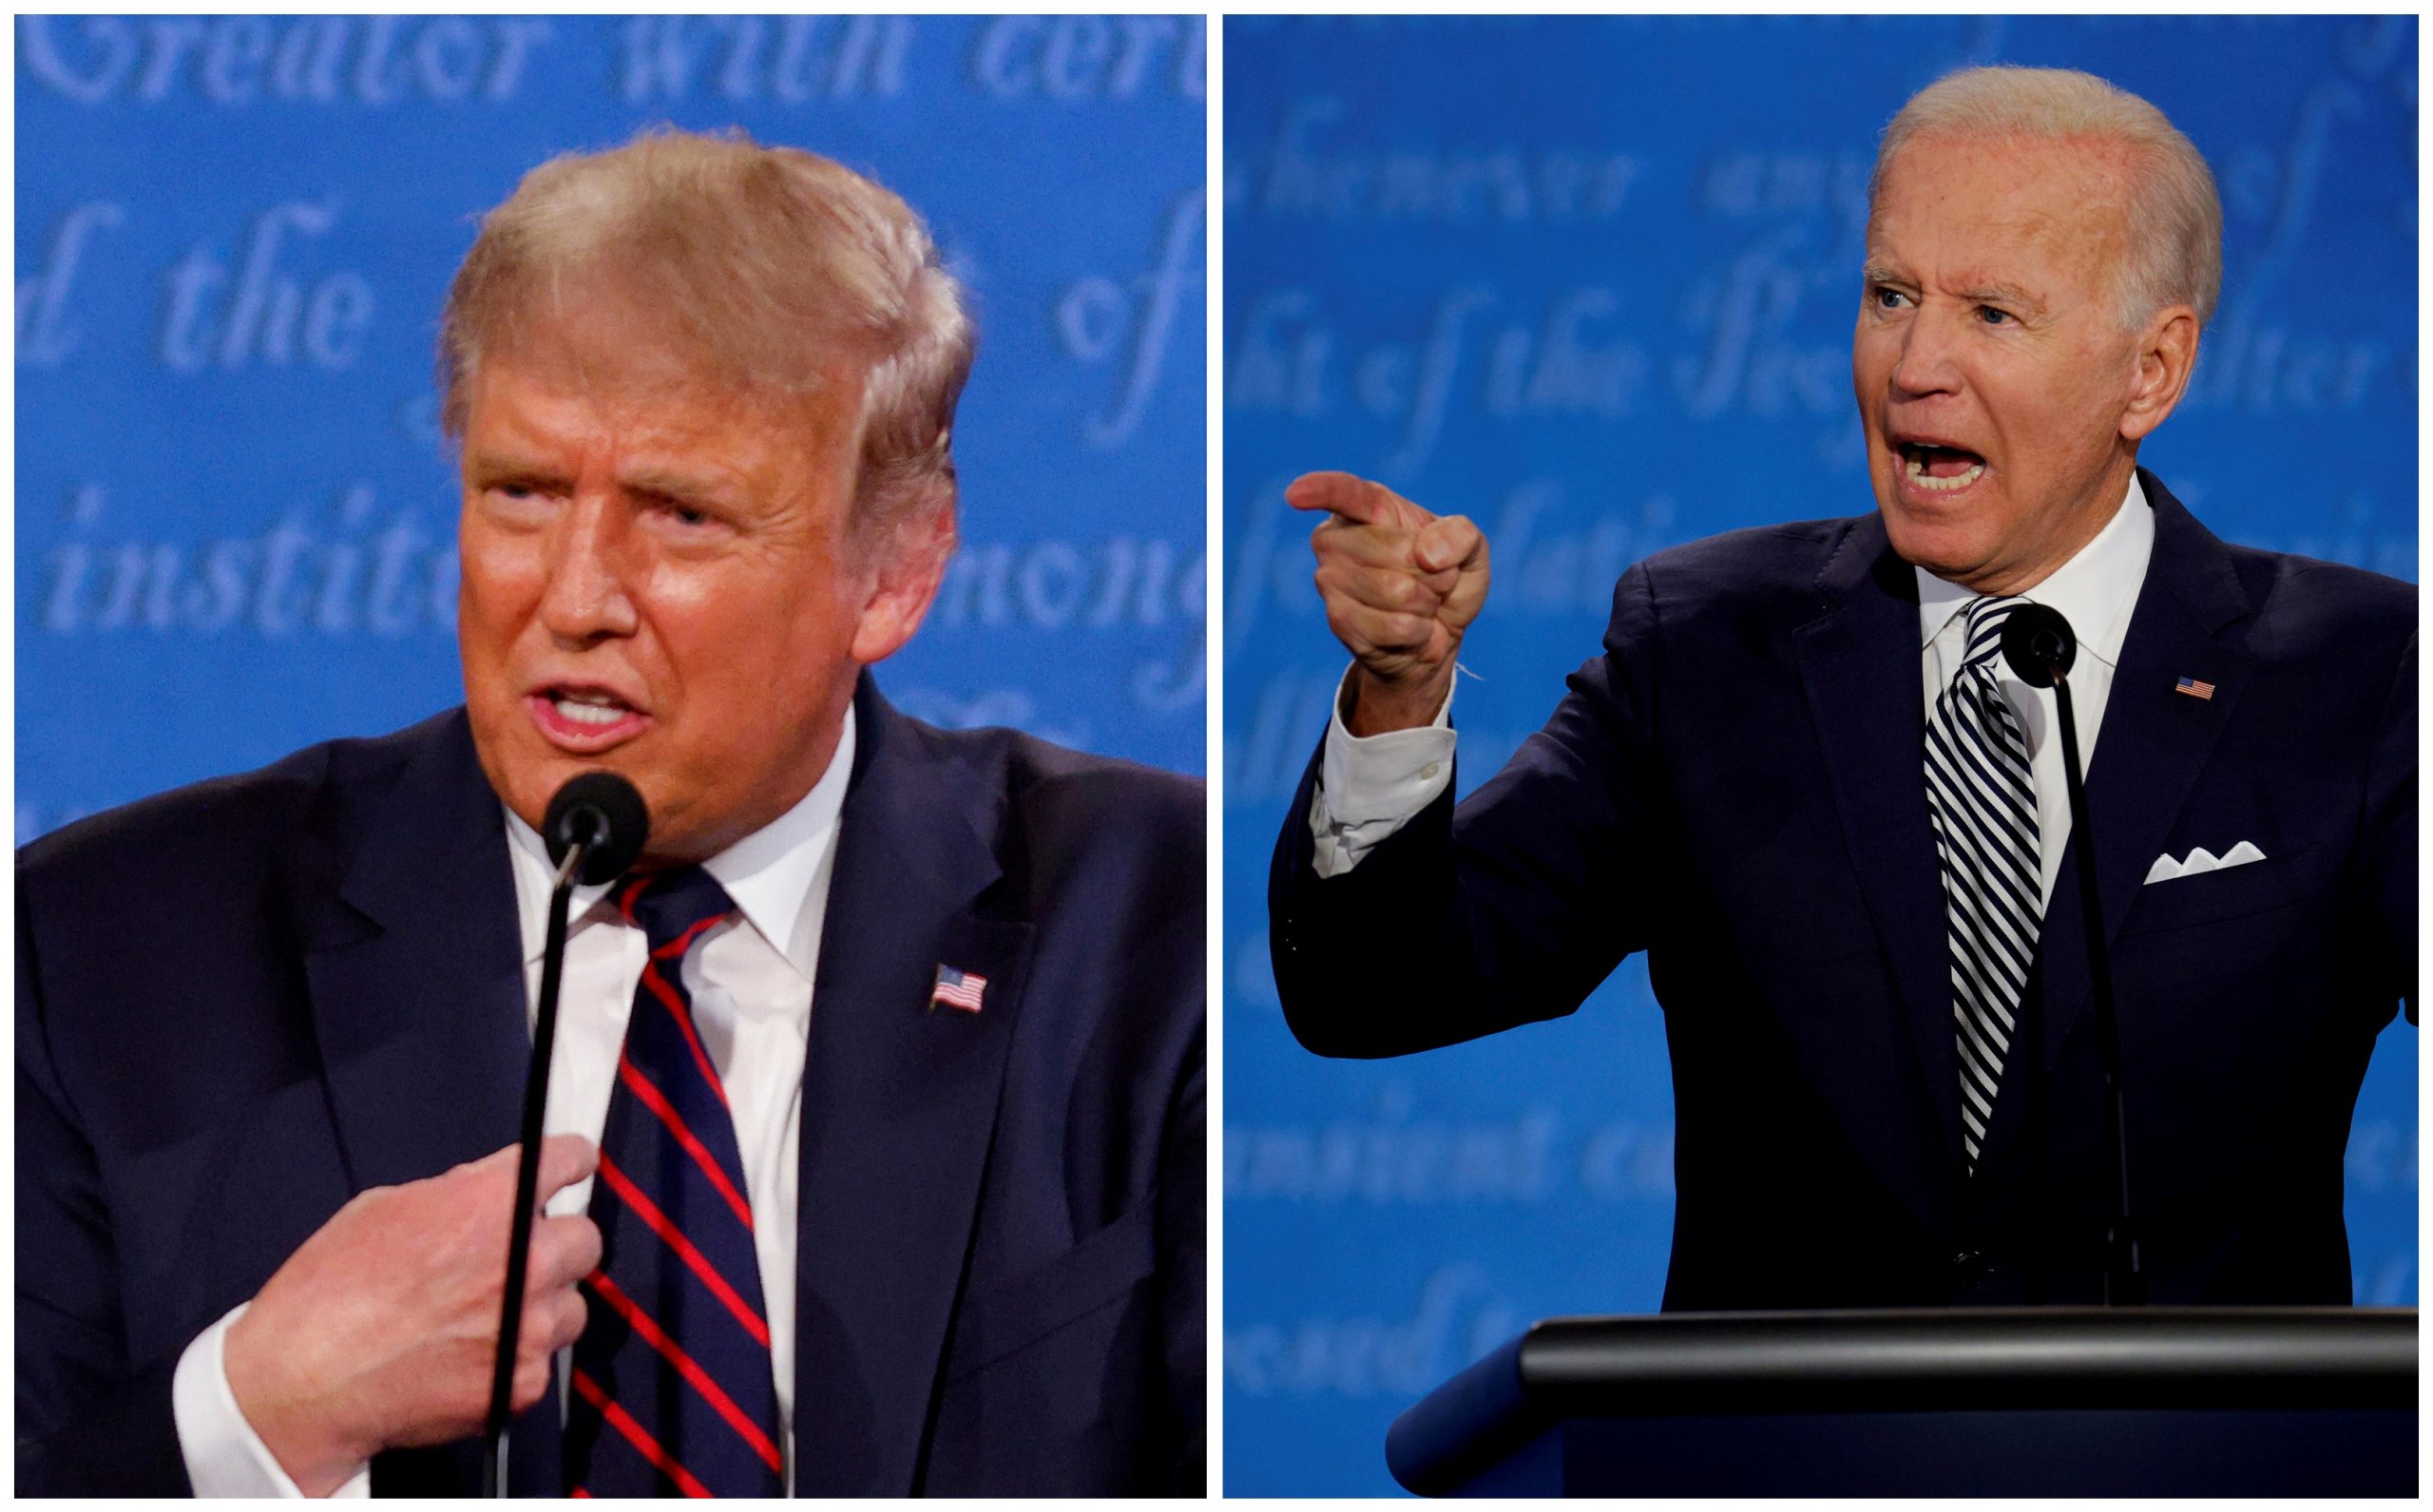 FILE PHOTO: A combination picture shows U.S. President Donald Trump and Democratic presidential nominee Joe Biden during the first 2020 presidential campaign debate, in Cleveland FILE PHOTO: A combination picture shows U.S. President Donald Trump and Democratic presidential nominee Joe Biden speaking during the first 2020 presidential campaign debate, held on the campus of the Cleveland Clinic at Case Western Reserve University in Cleveland, Ohio, U.S., September 29, 2020. REUTERS/Brian Snyder/File Photo BRIAN SNYDER